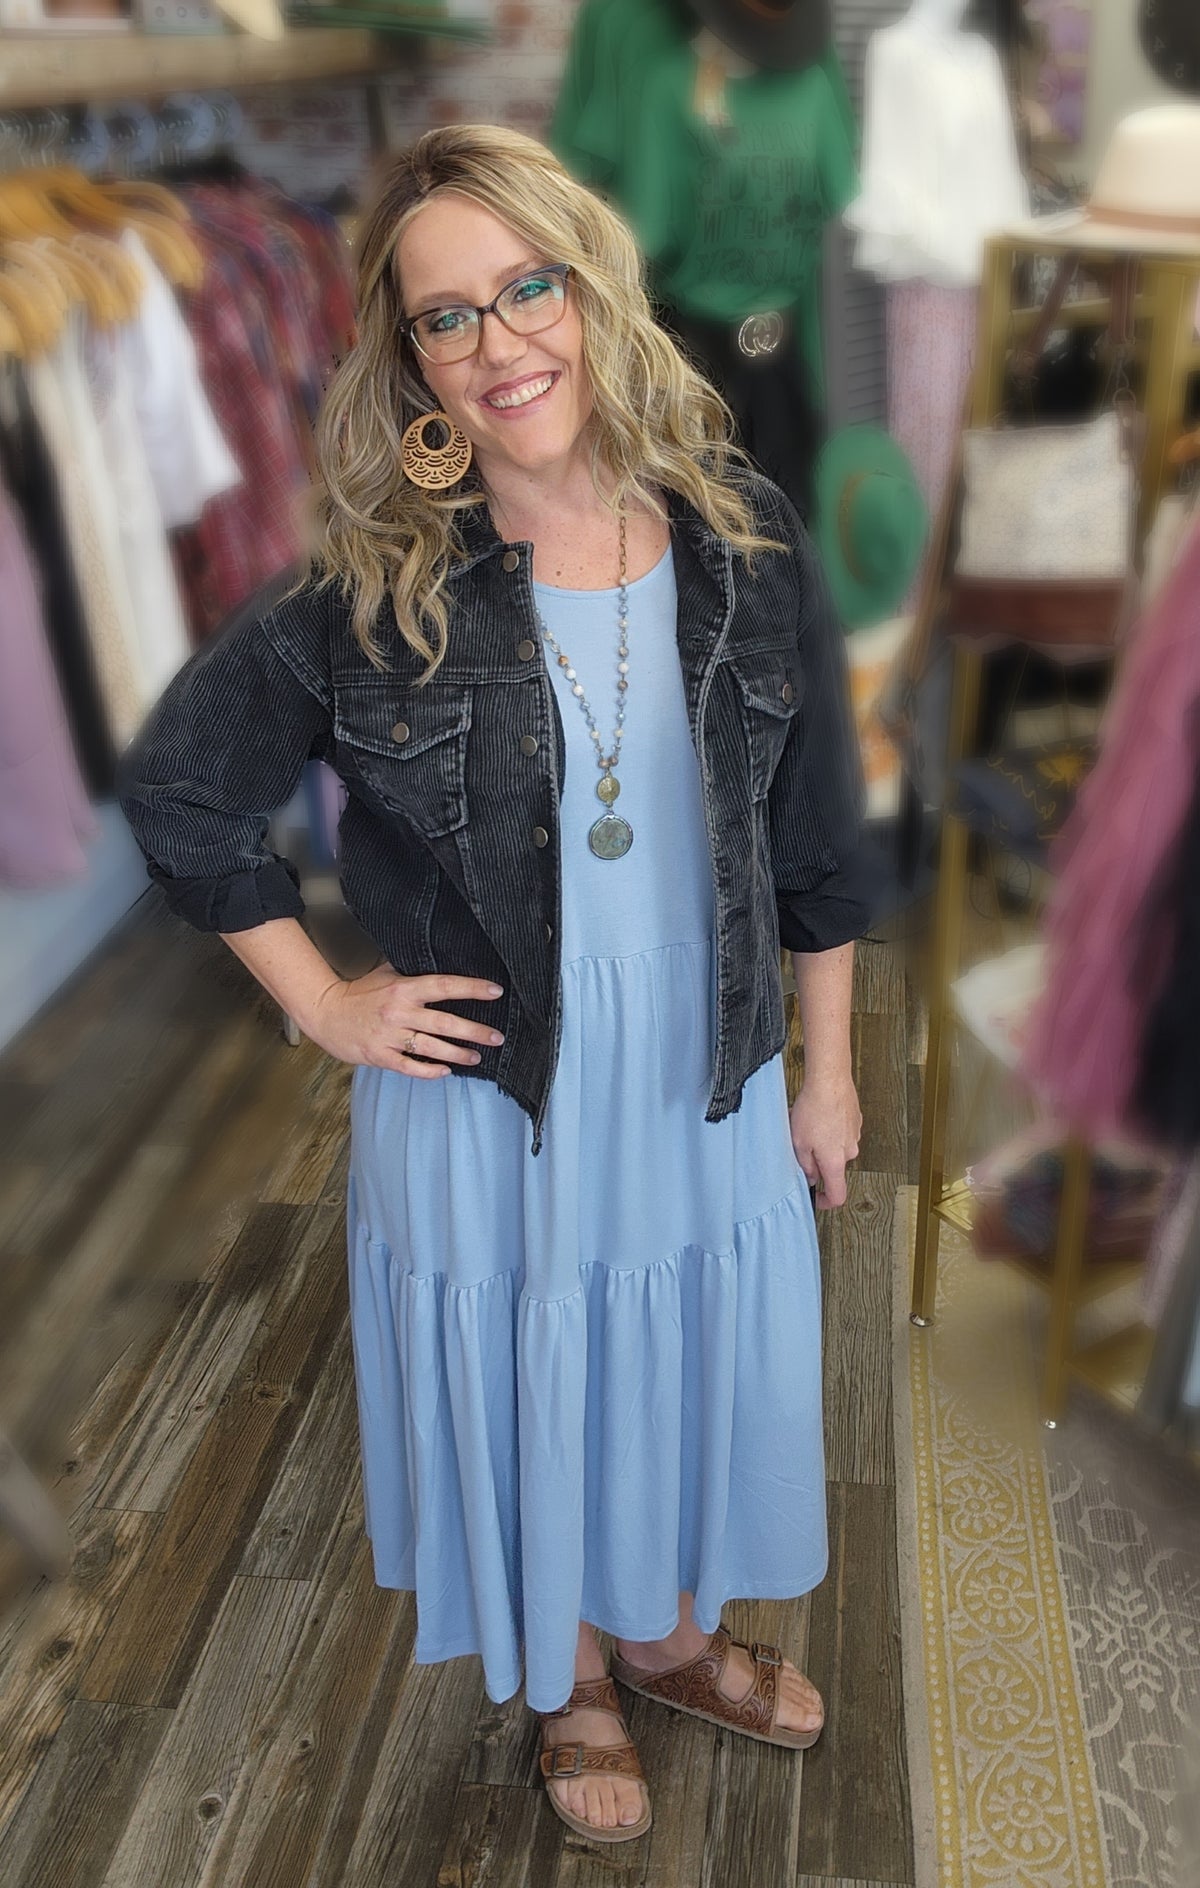 Sunny Day Dress in Lake Blue Sm - 3XL * on sale